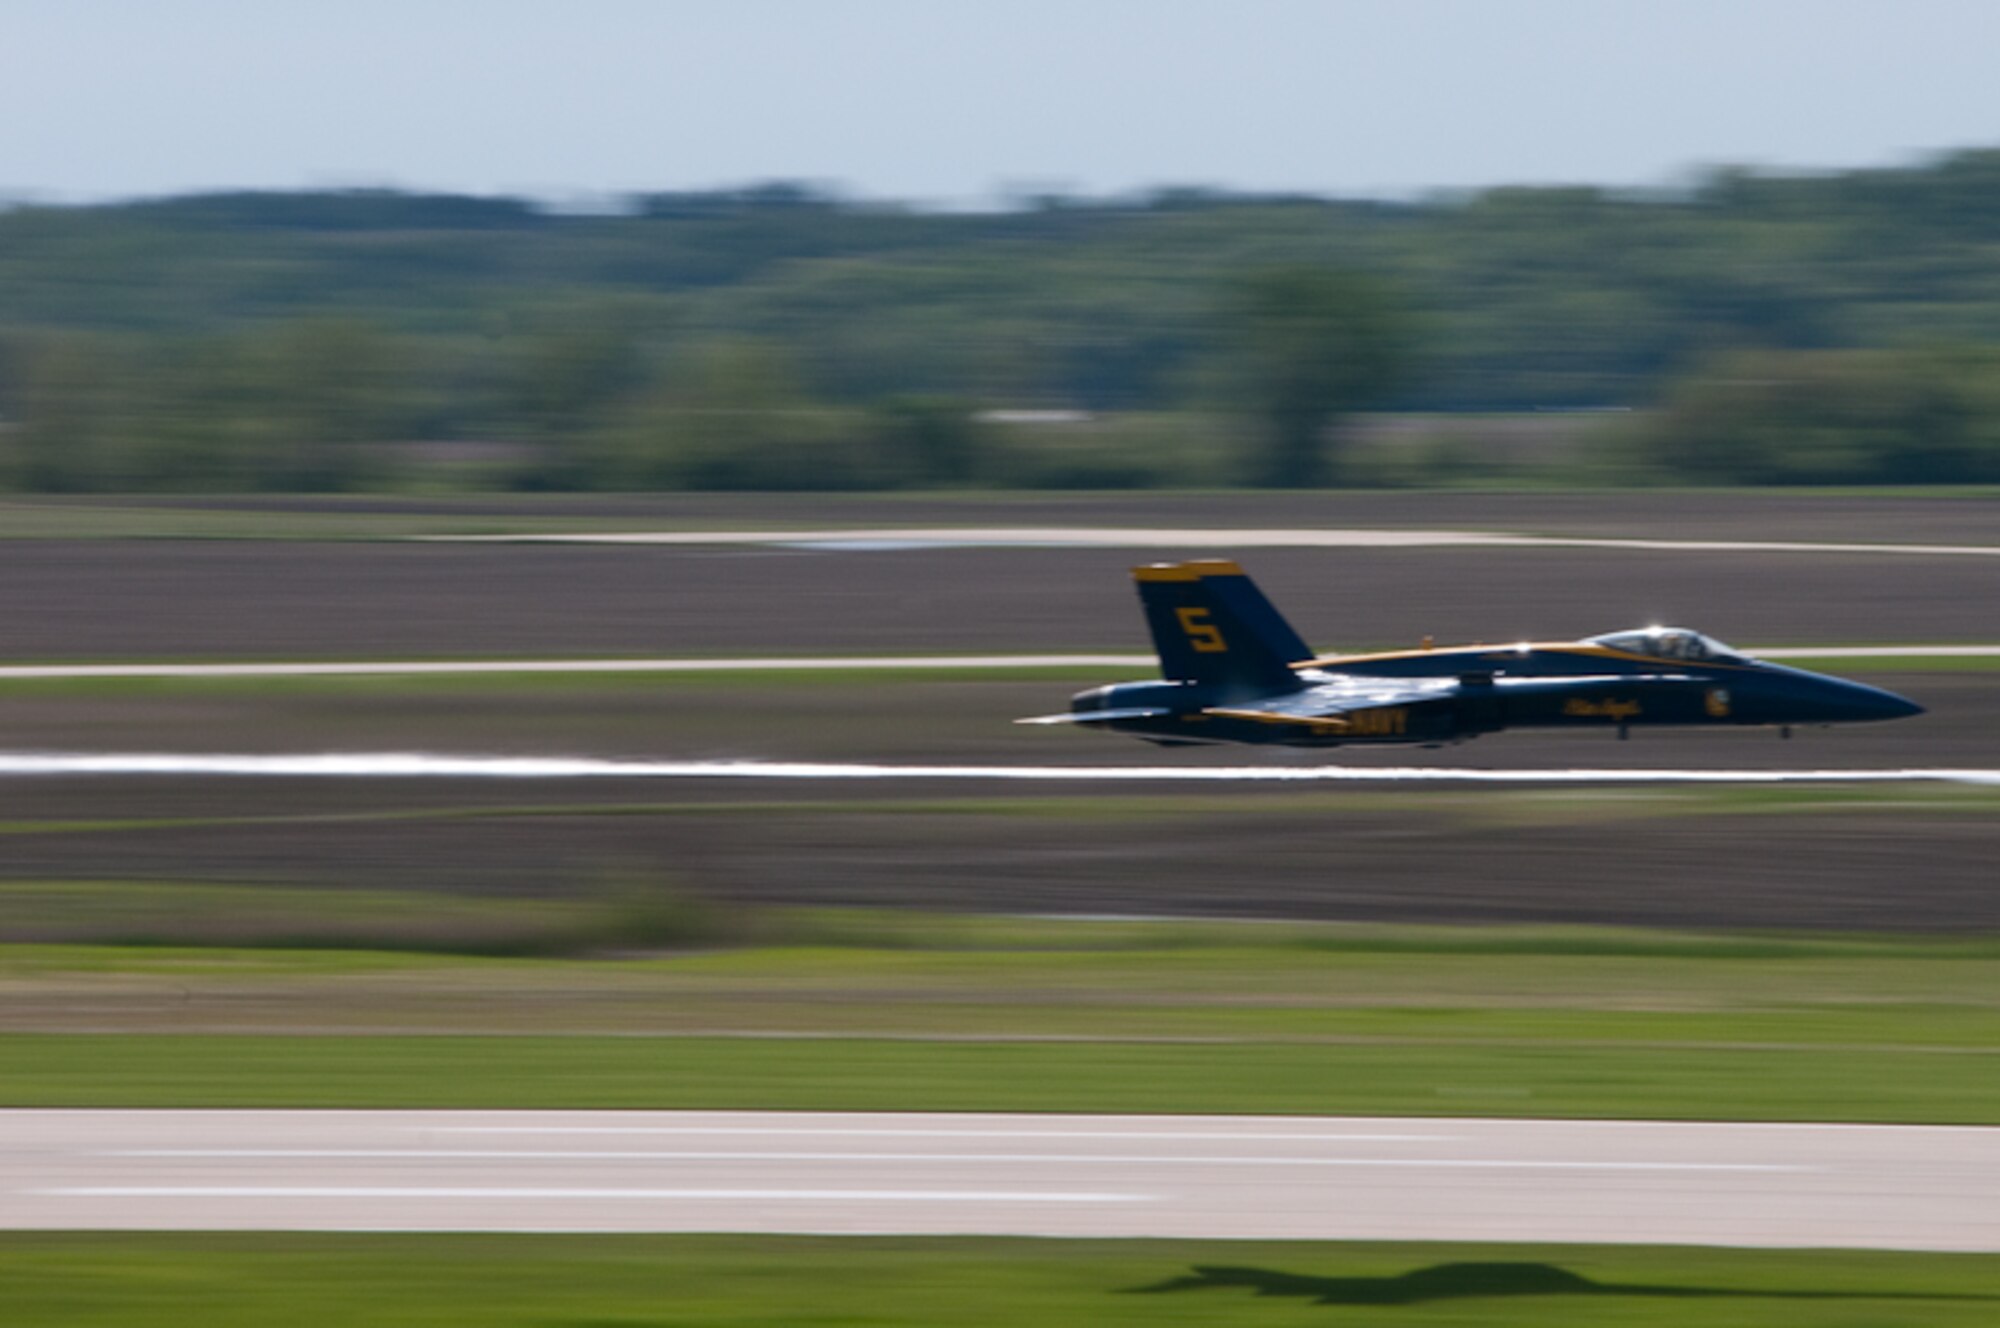 The 139th Airlift Wing hosts the Sound of Speed Air Show on the base in St. Joseph, Mo., Friday, April 30, 2010.  The star of the Air Show is the Navy's Blue Angels.  (Photo by Airman 1st Class Kelsey Stuart/Released)